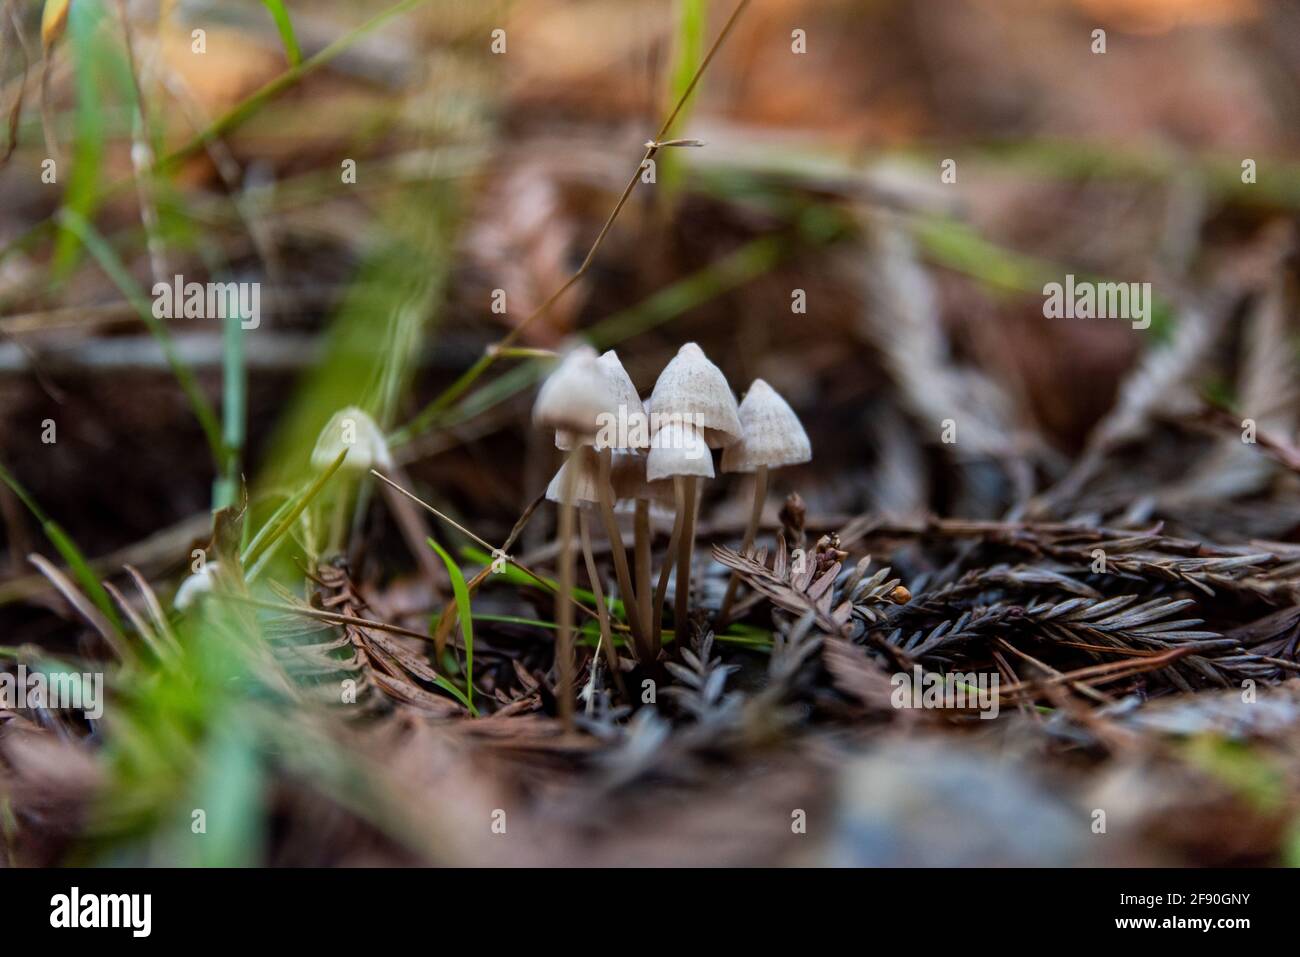 Grouping of tiny mushrooms on forest floor with Redwood needles Stock Photo